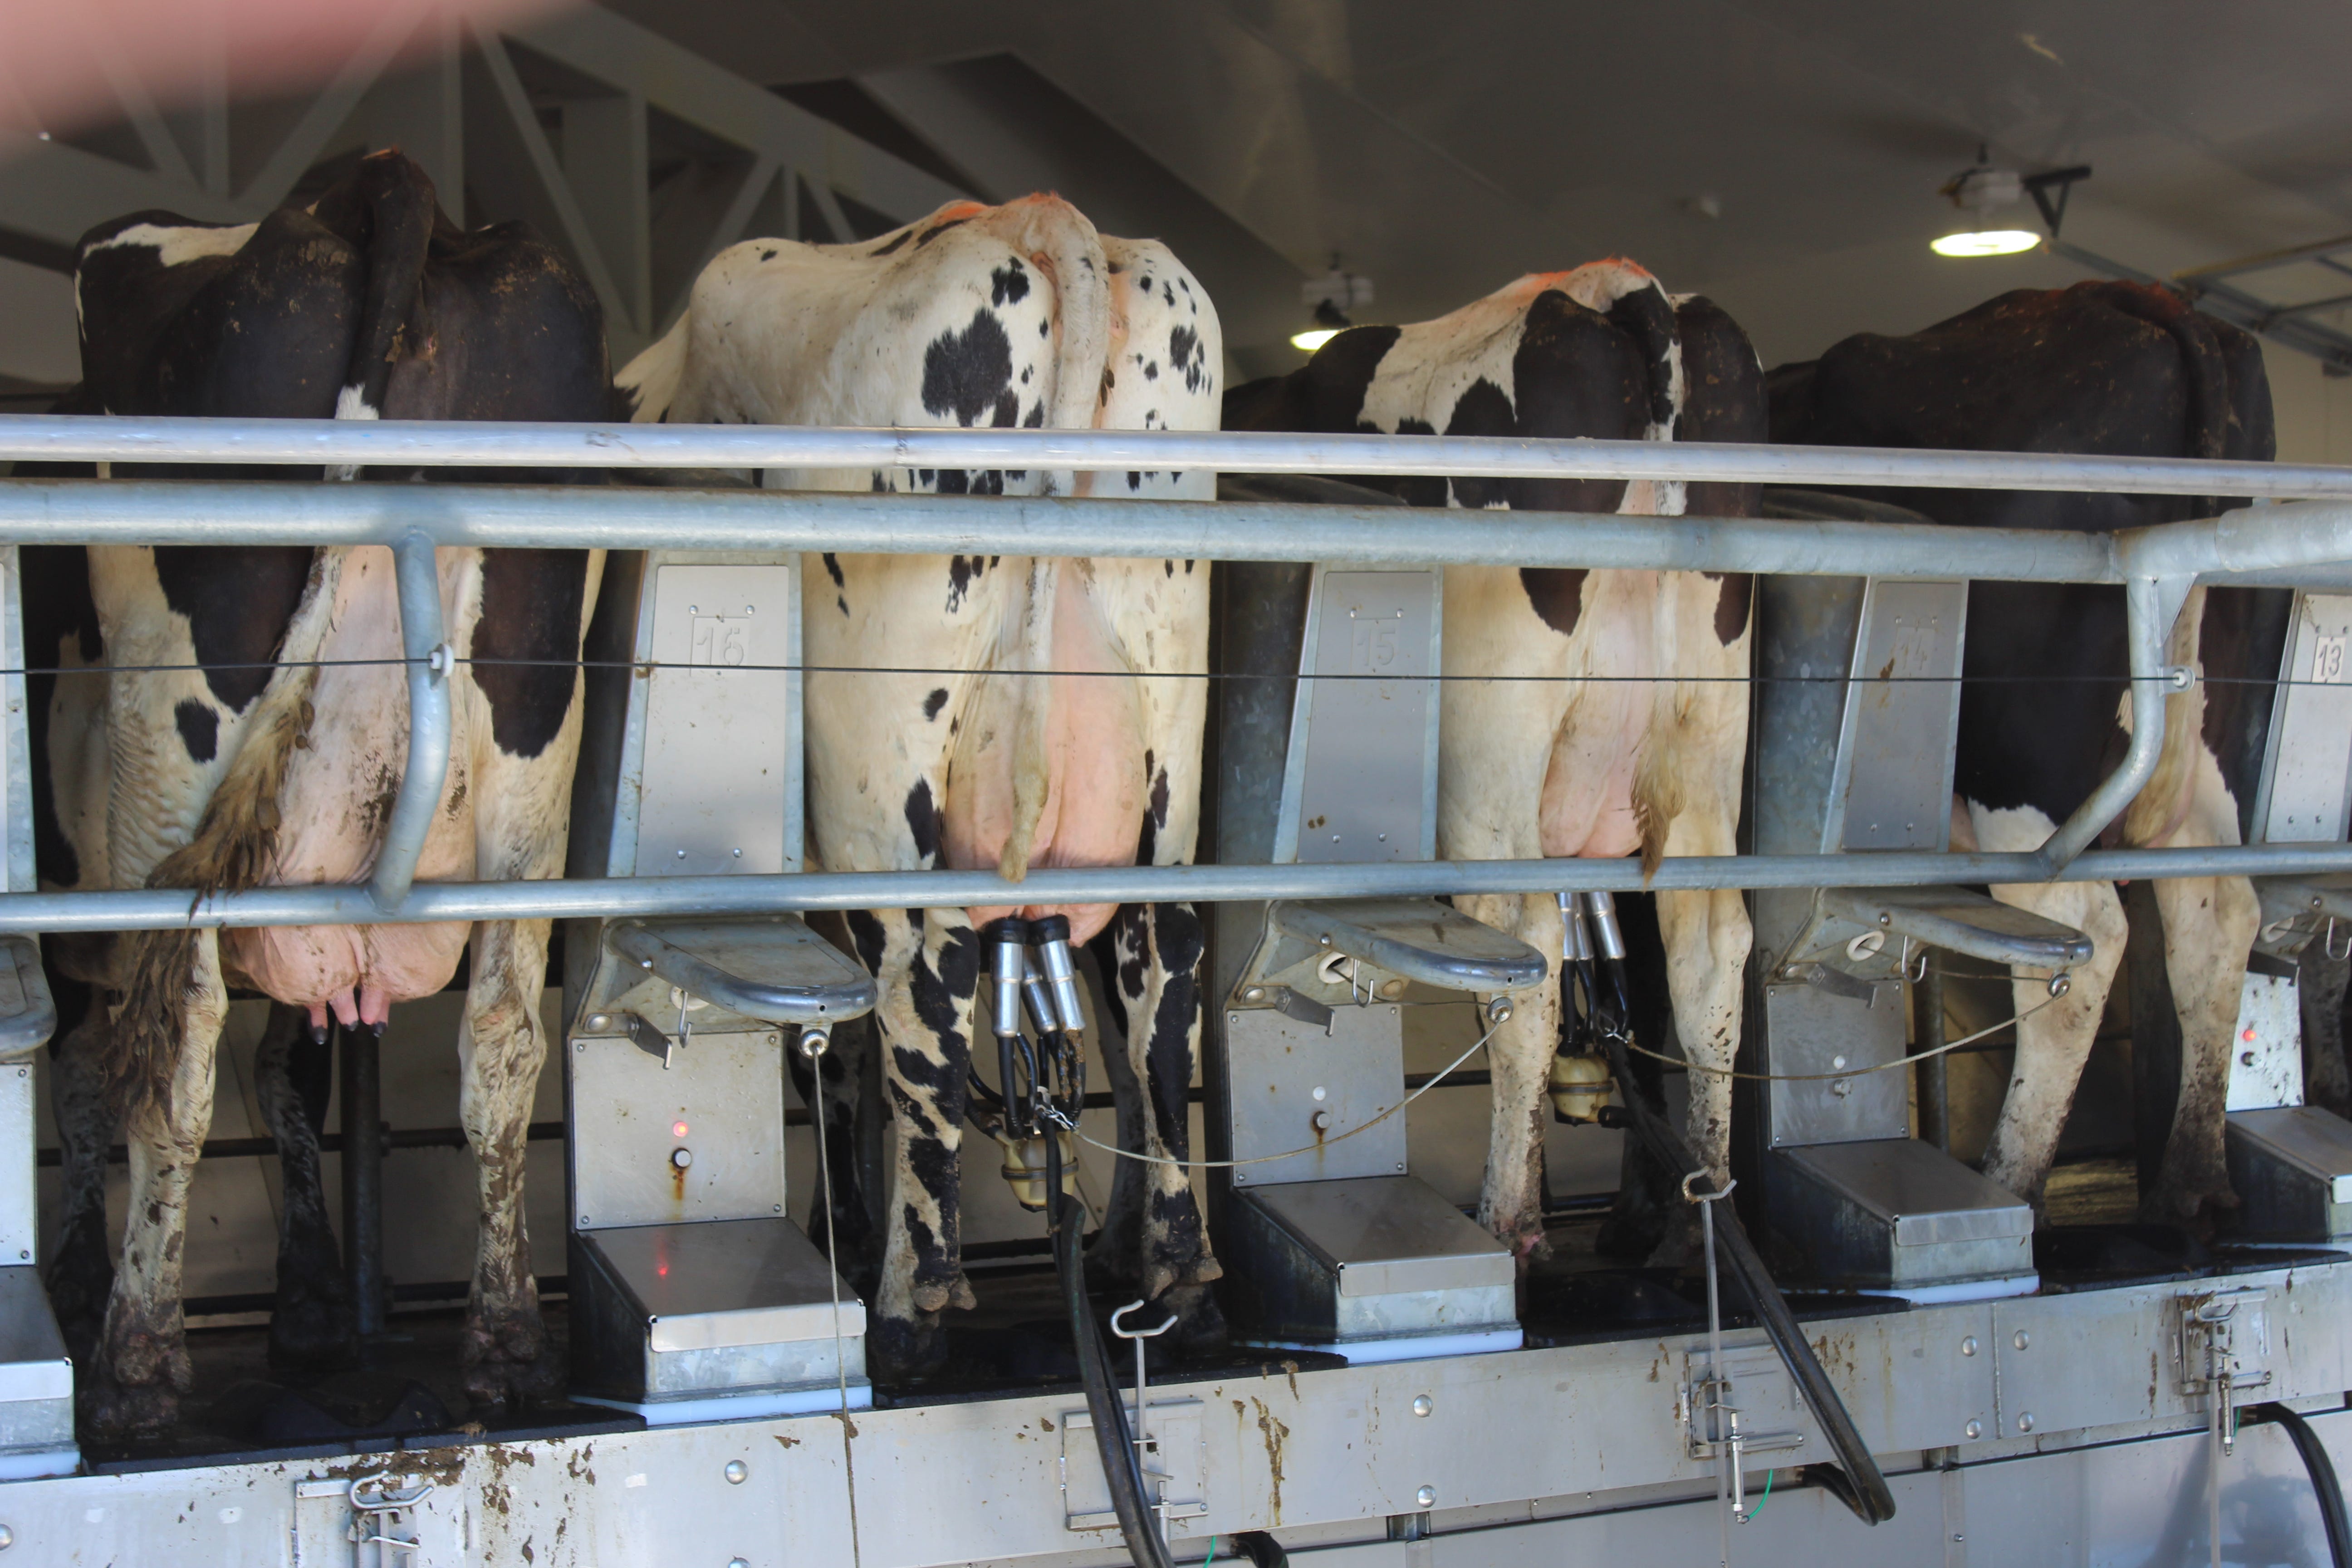 Wisconsin dairy farmers and other producers are feeling the impact of trade uncertainty caused by the coronavirus outbreak.